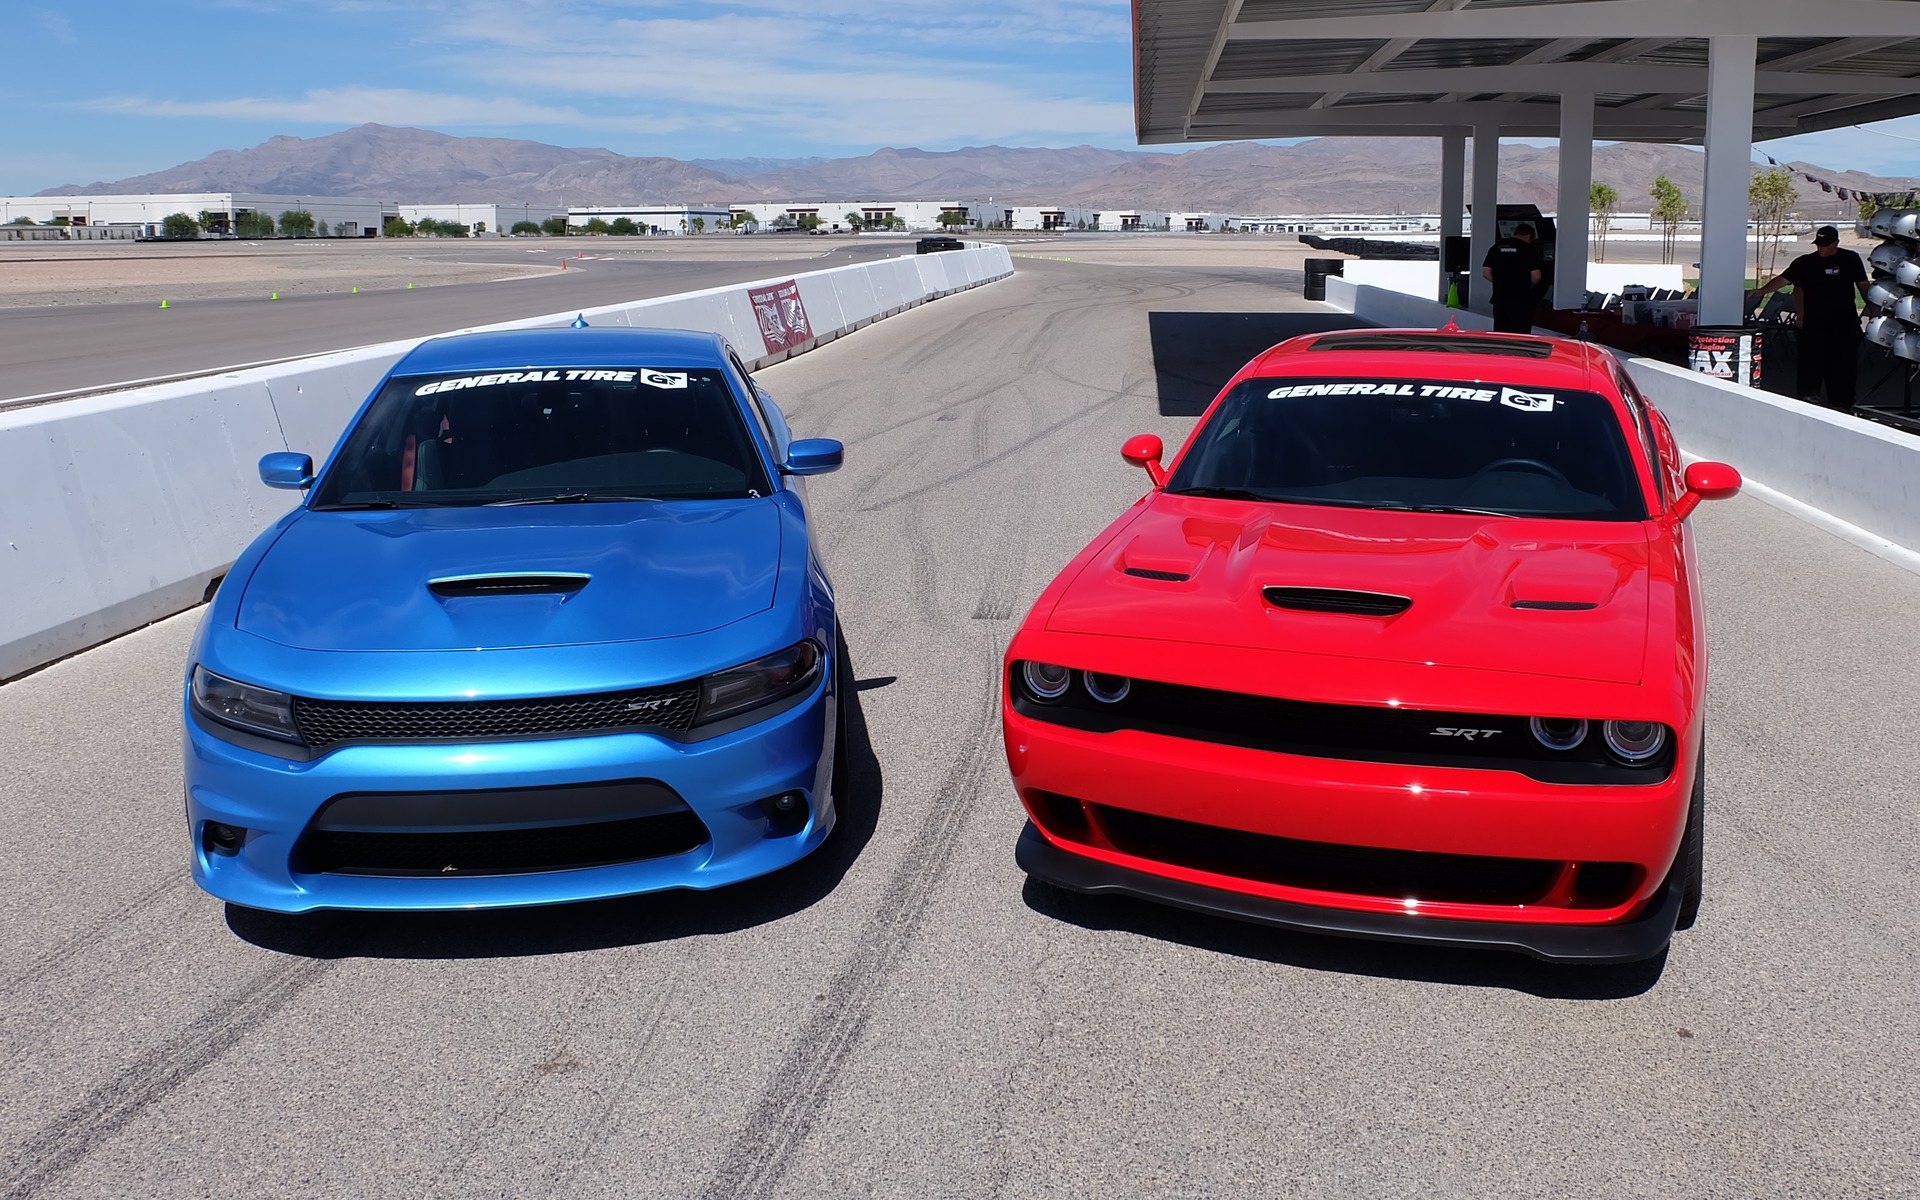 A Charger SRT and a Challenger Hellcat ready for some action on the track.